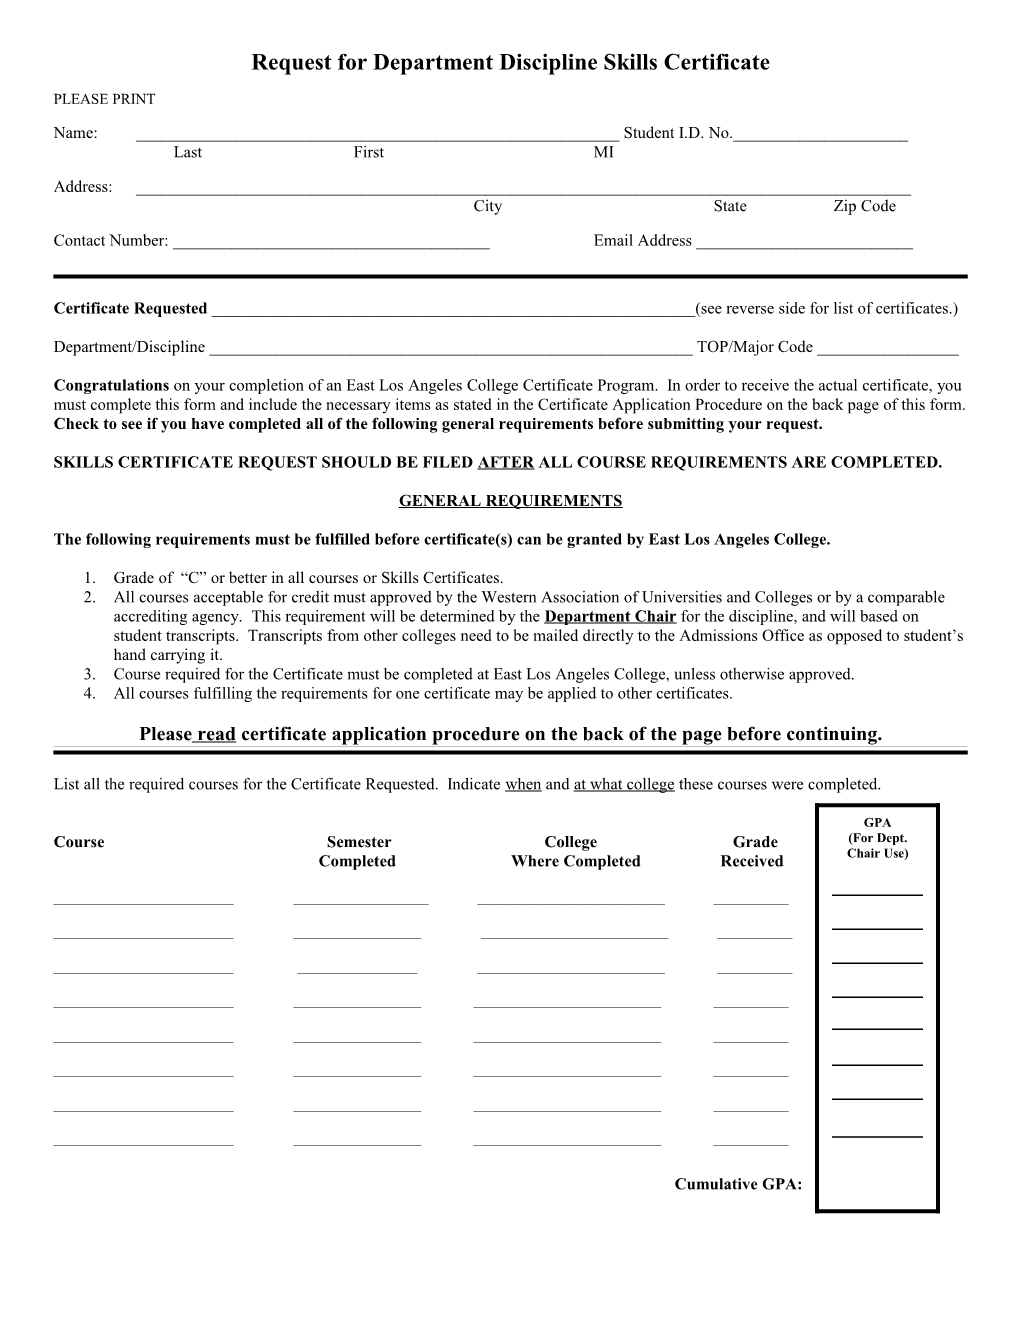 Request for Department Certificate of Completion